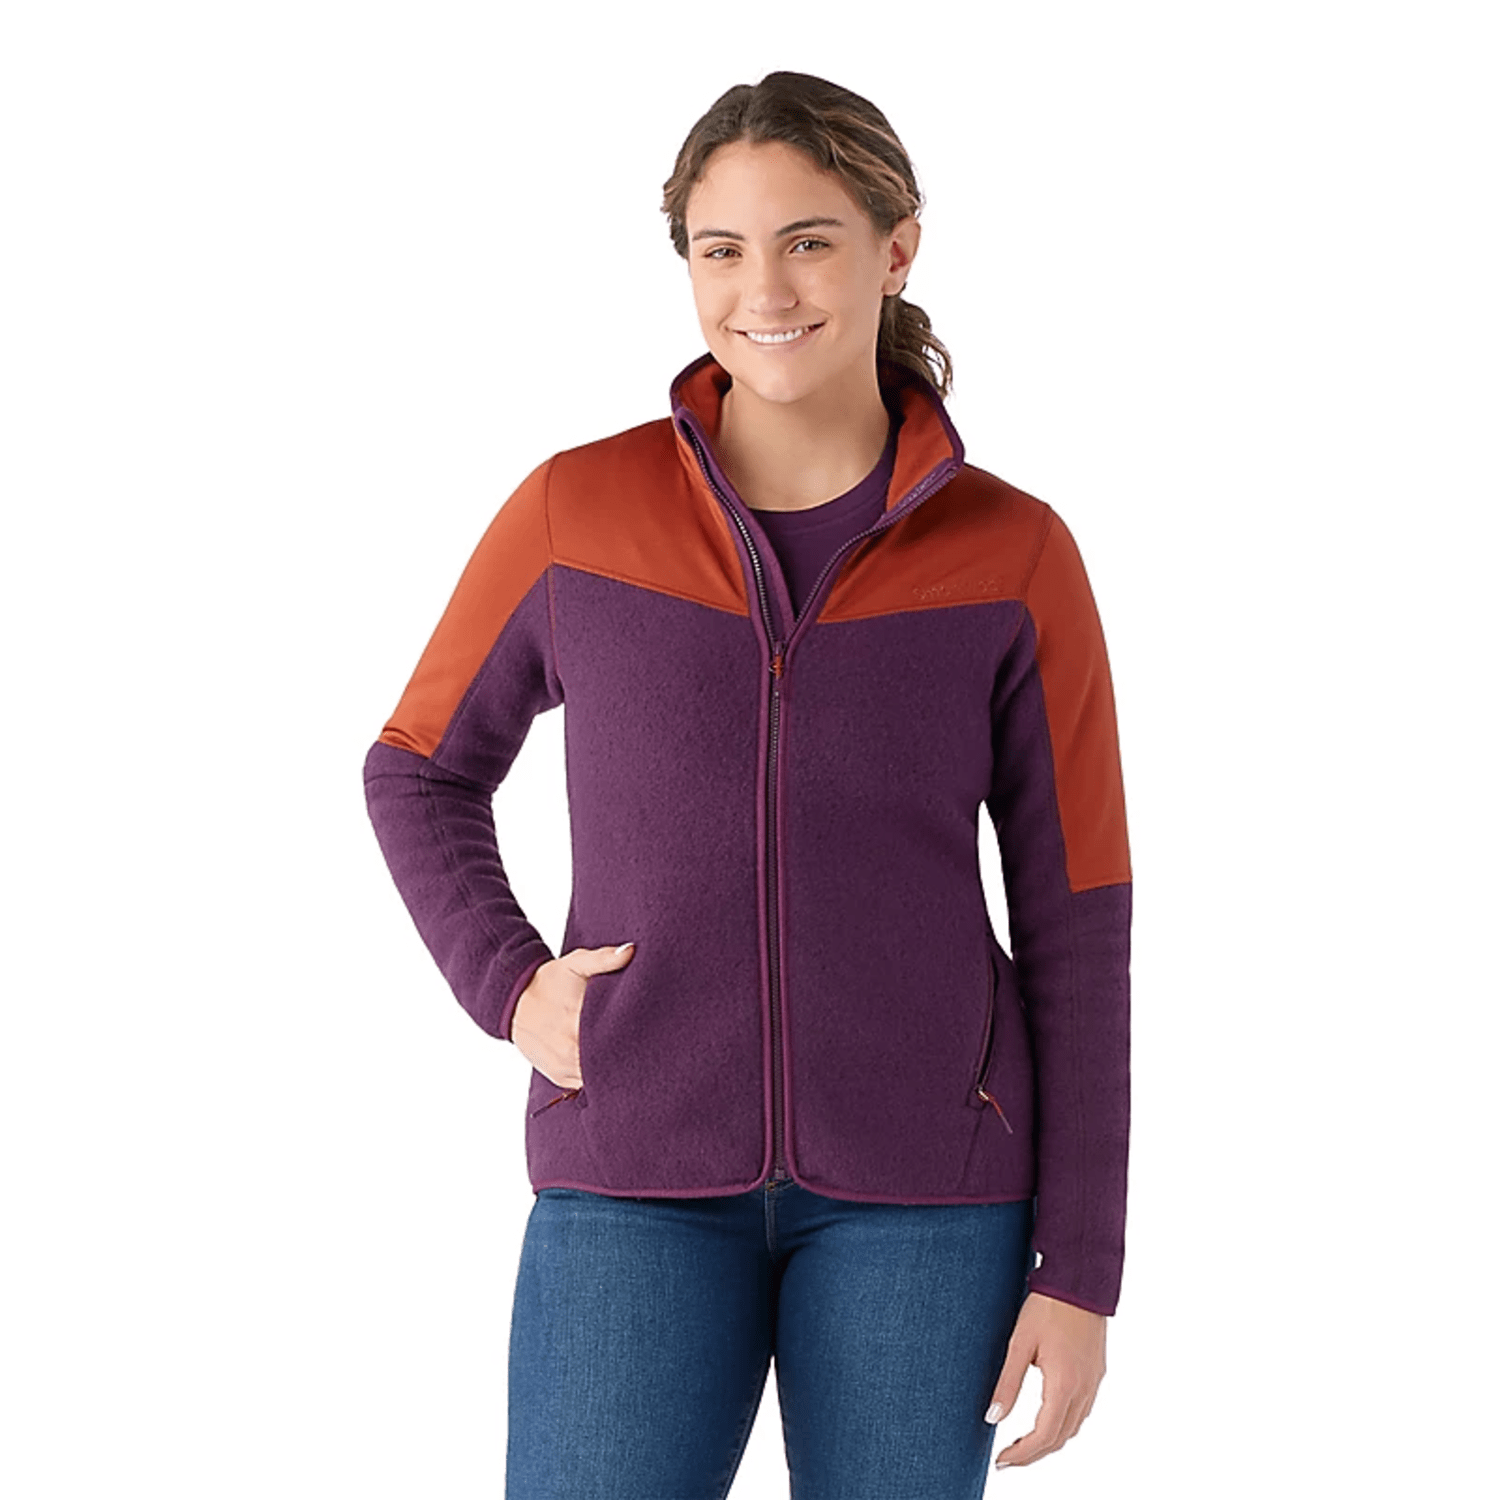 Shop the Women's Hudson Trail Fleece Full Zip from our collection of  apparel today.